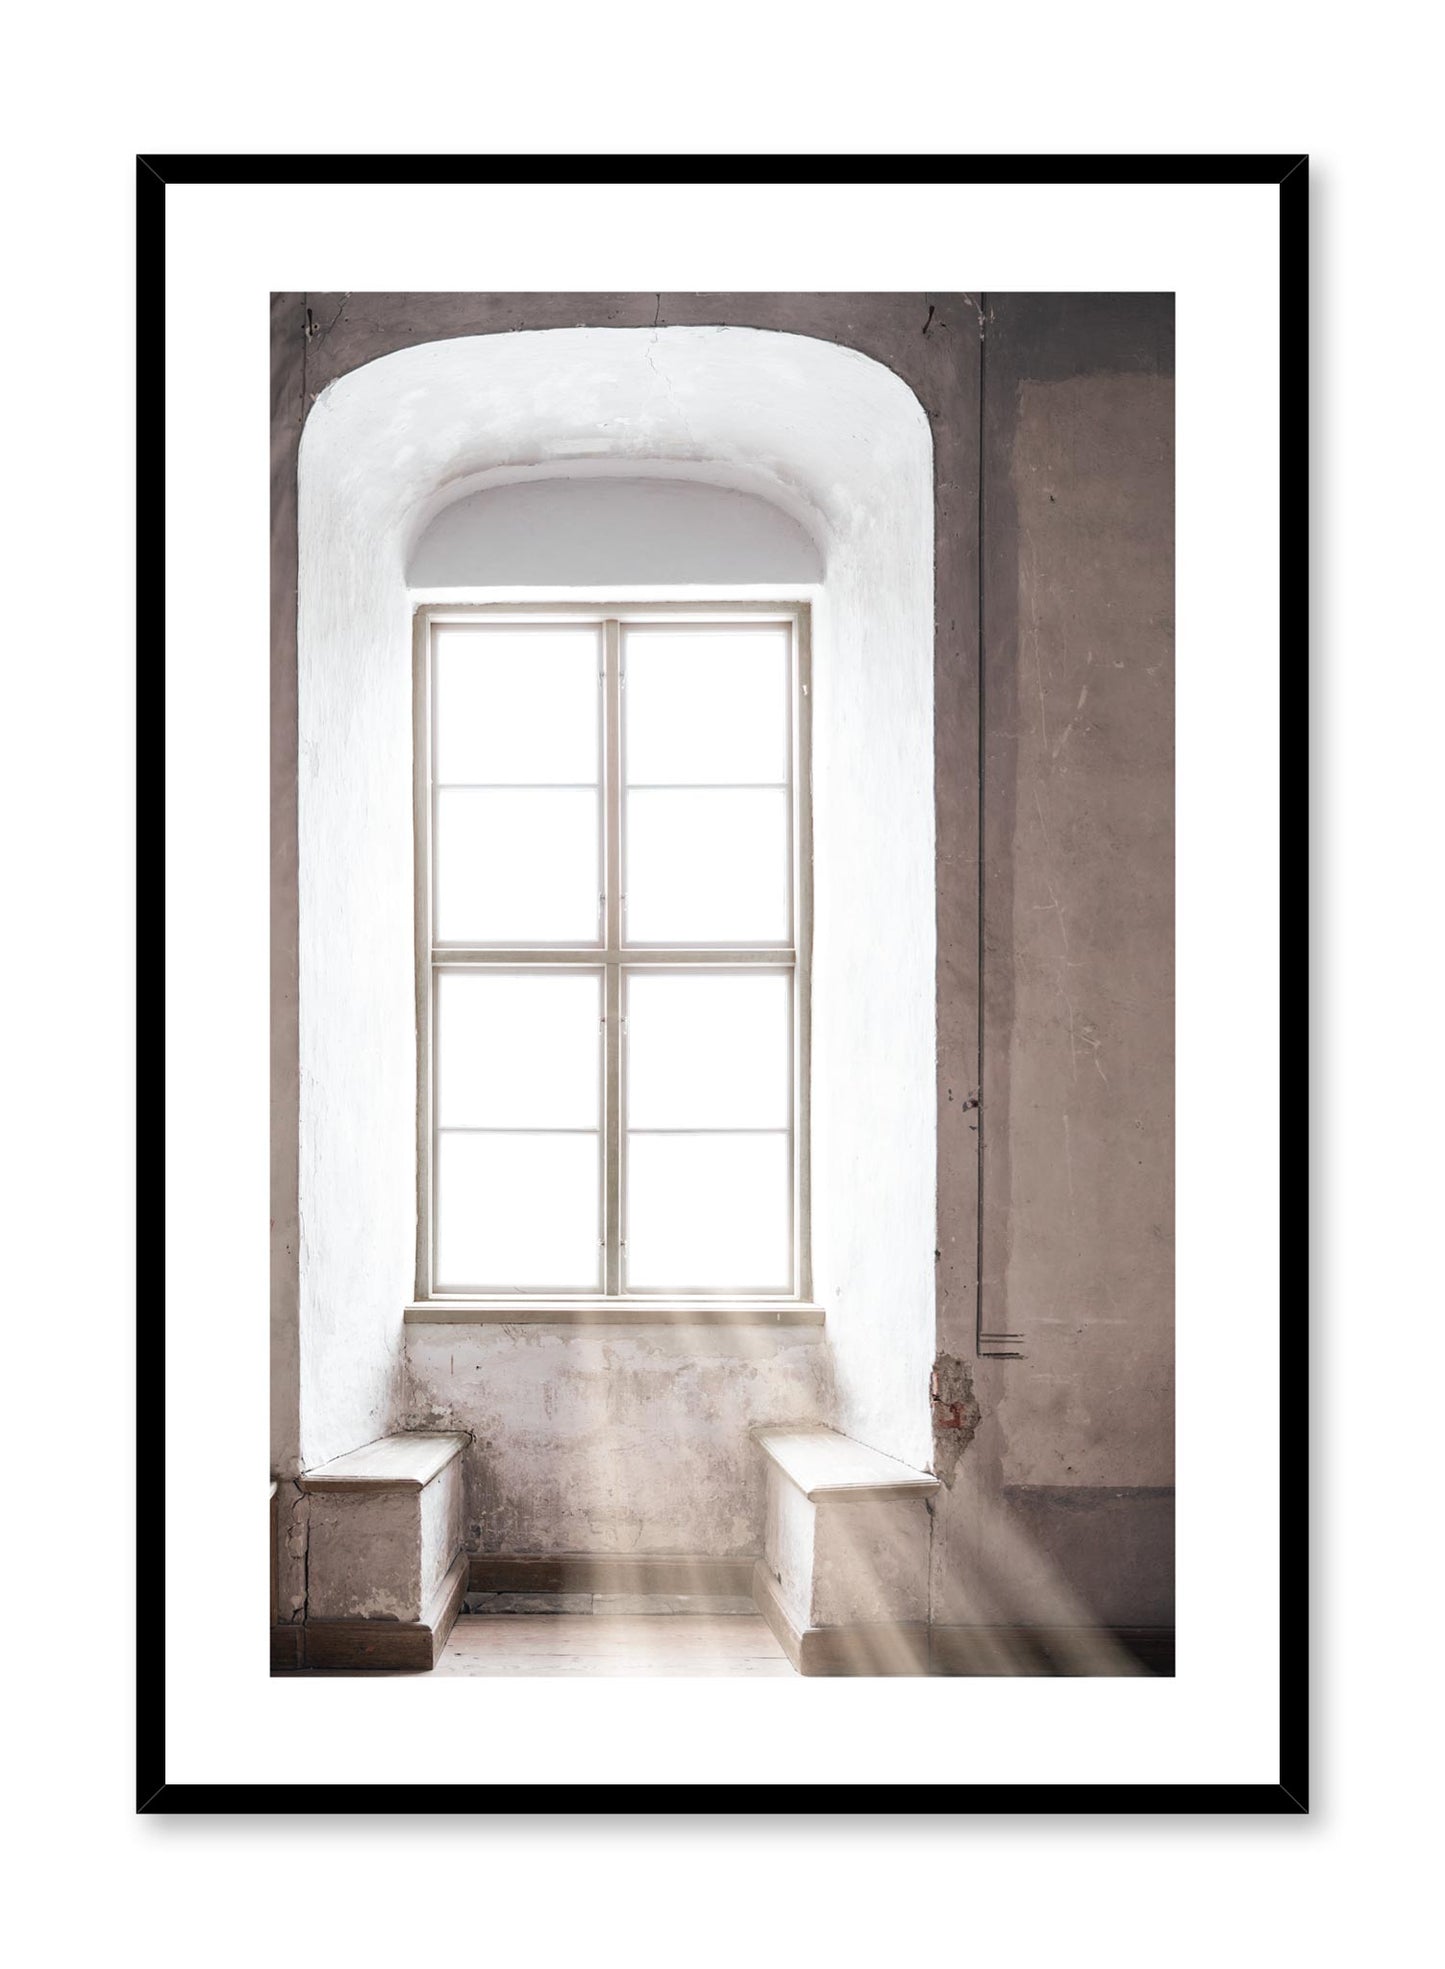 Minimalist design photography poster of Rays of Light window by Love Warriors Creative Studio - Buy at Opposite Wall